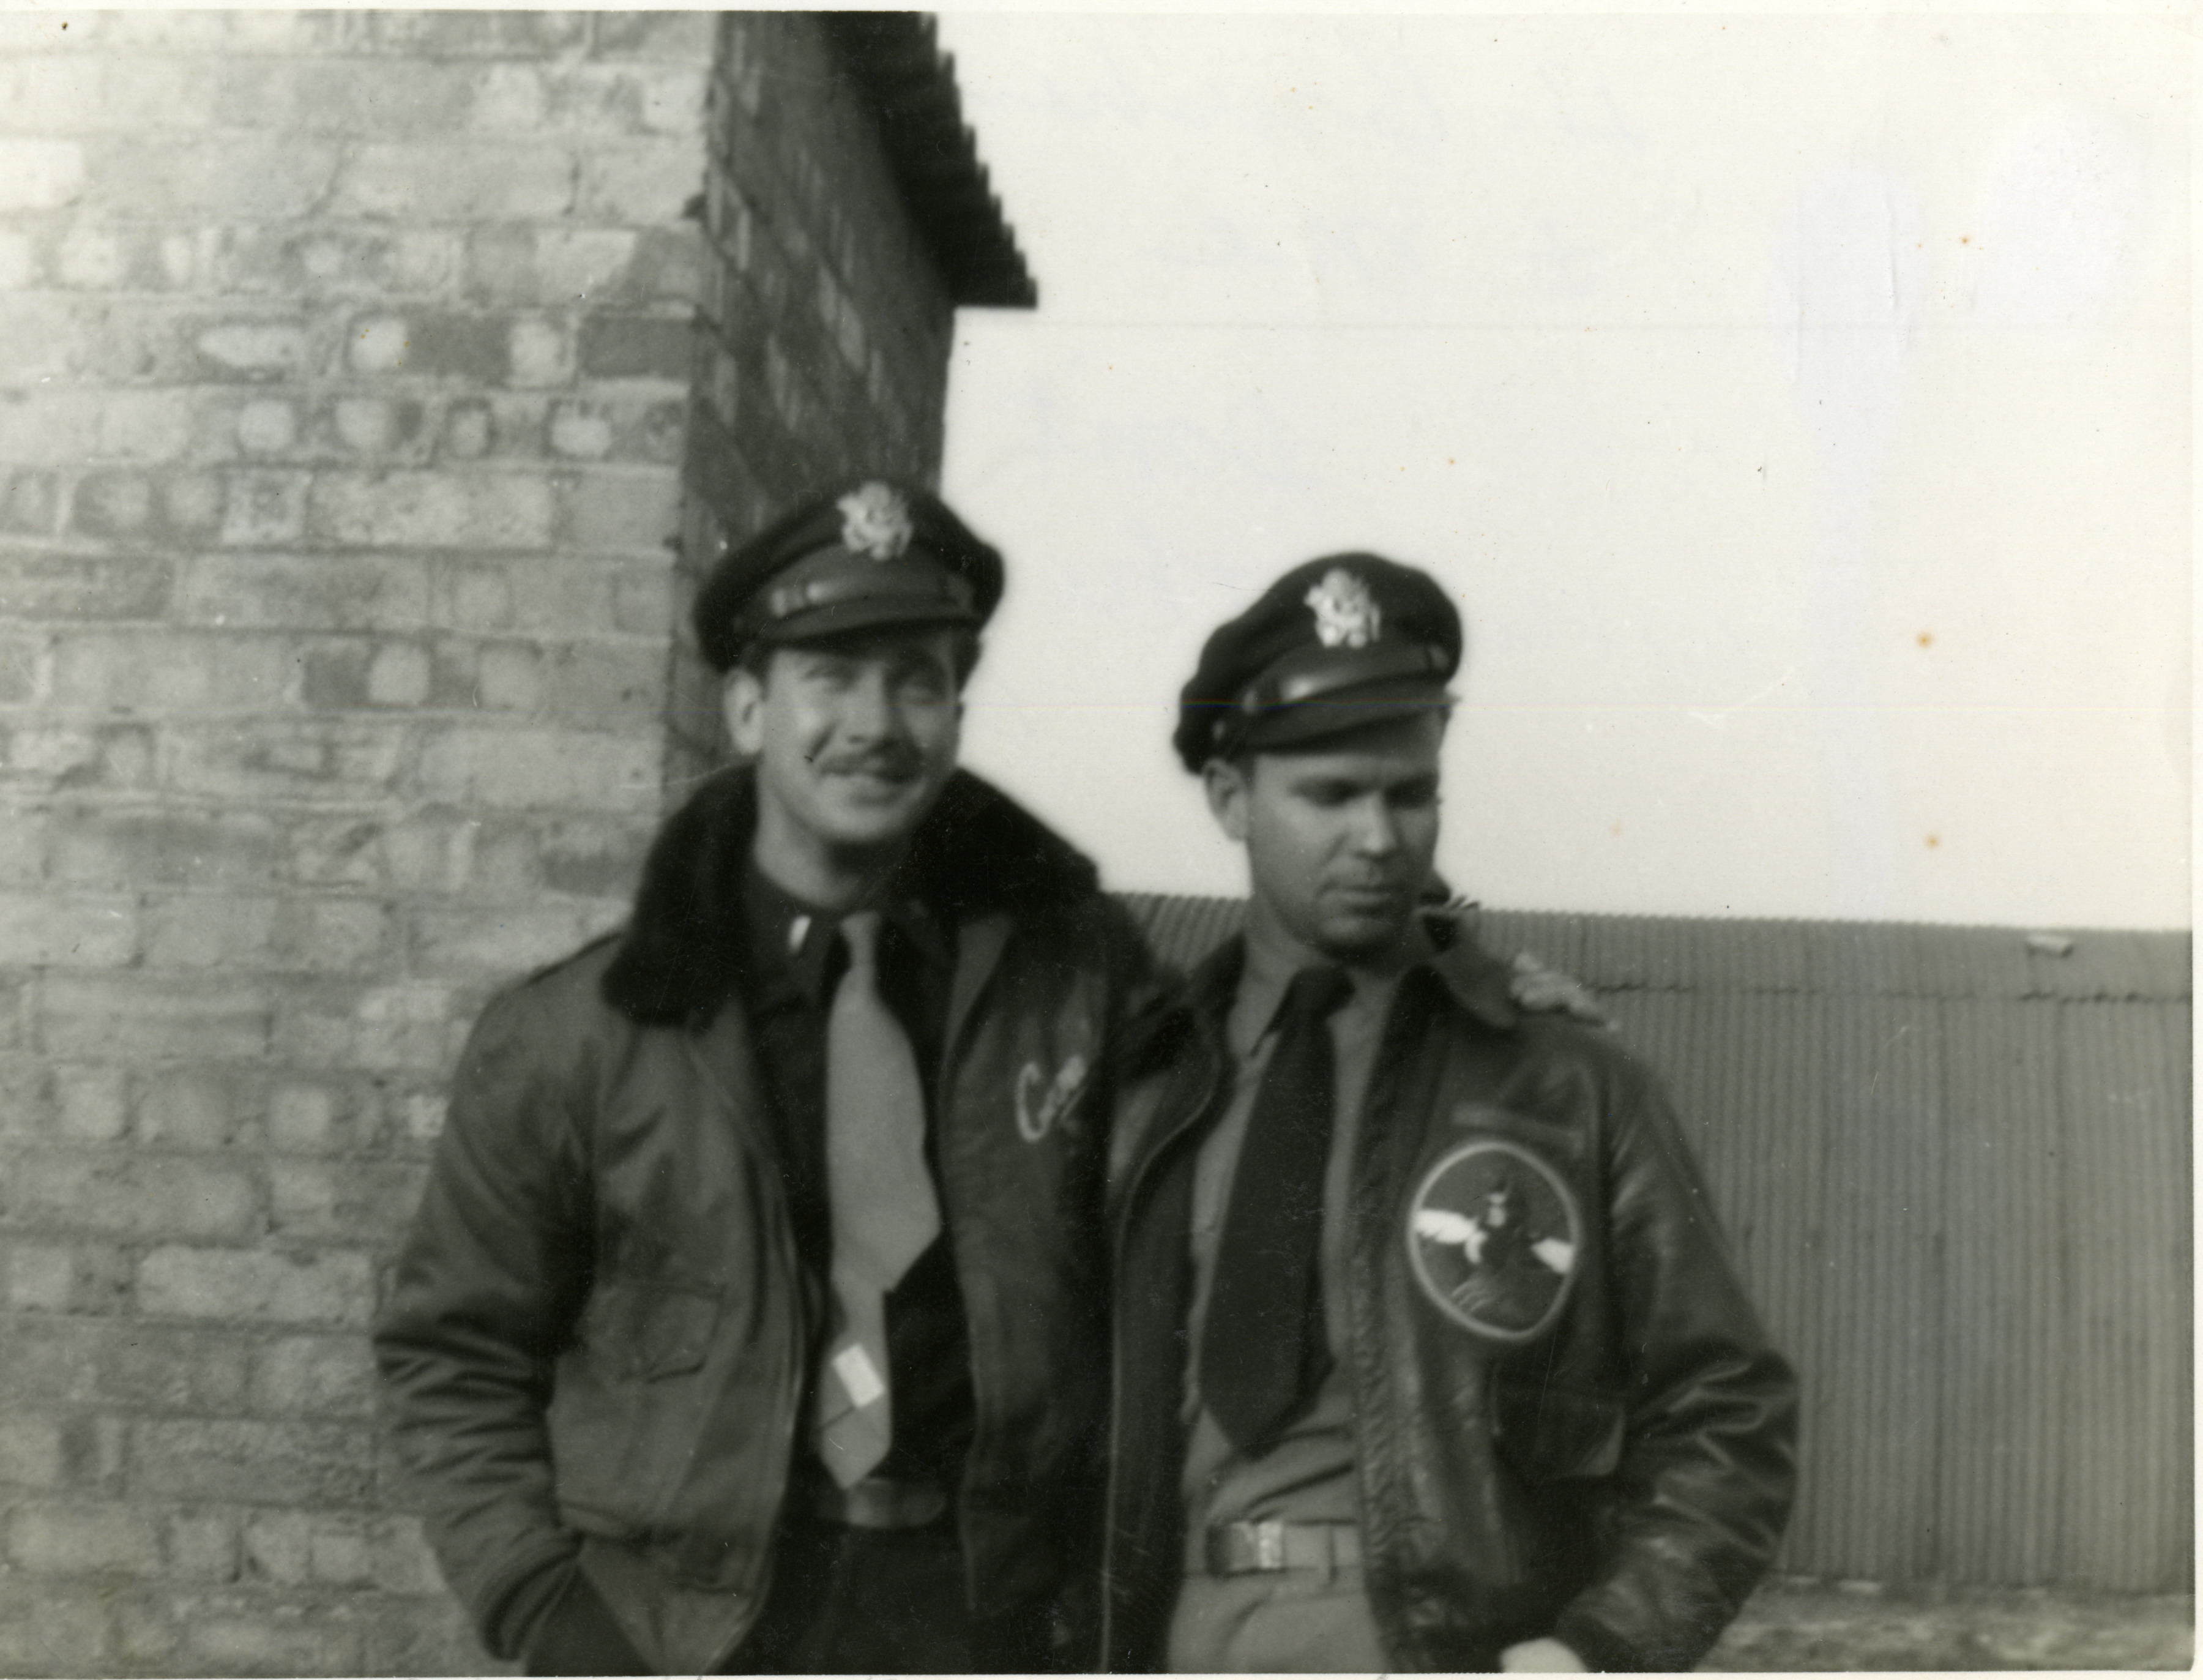 USAAF Lieutenants Brusher and Galloway in England | The Digital ...